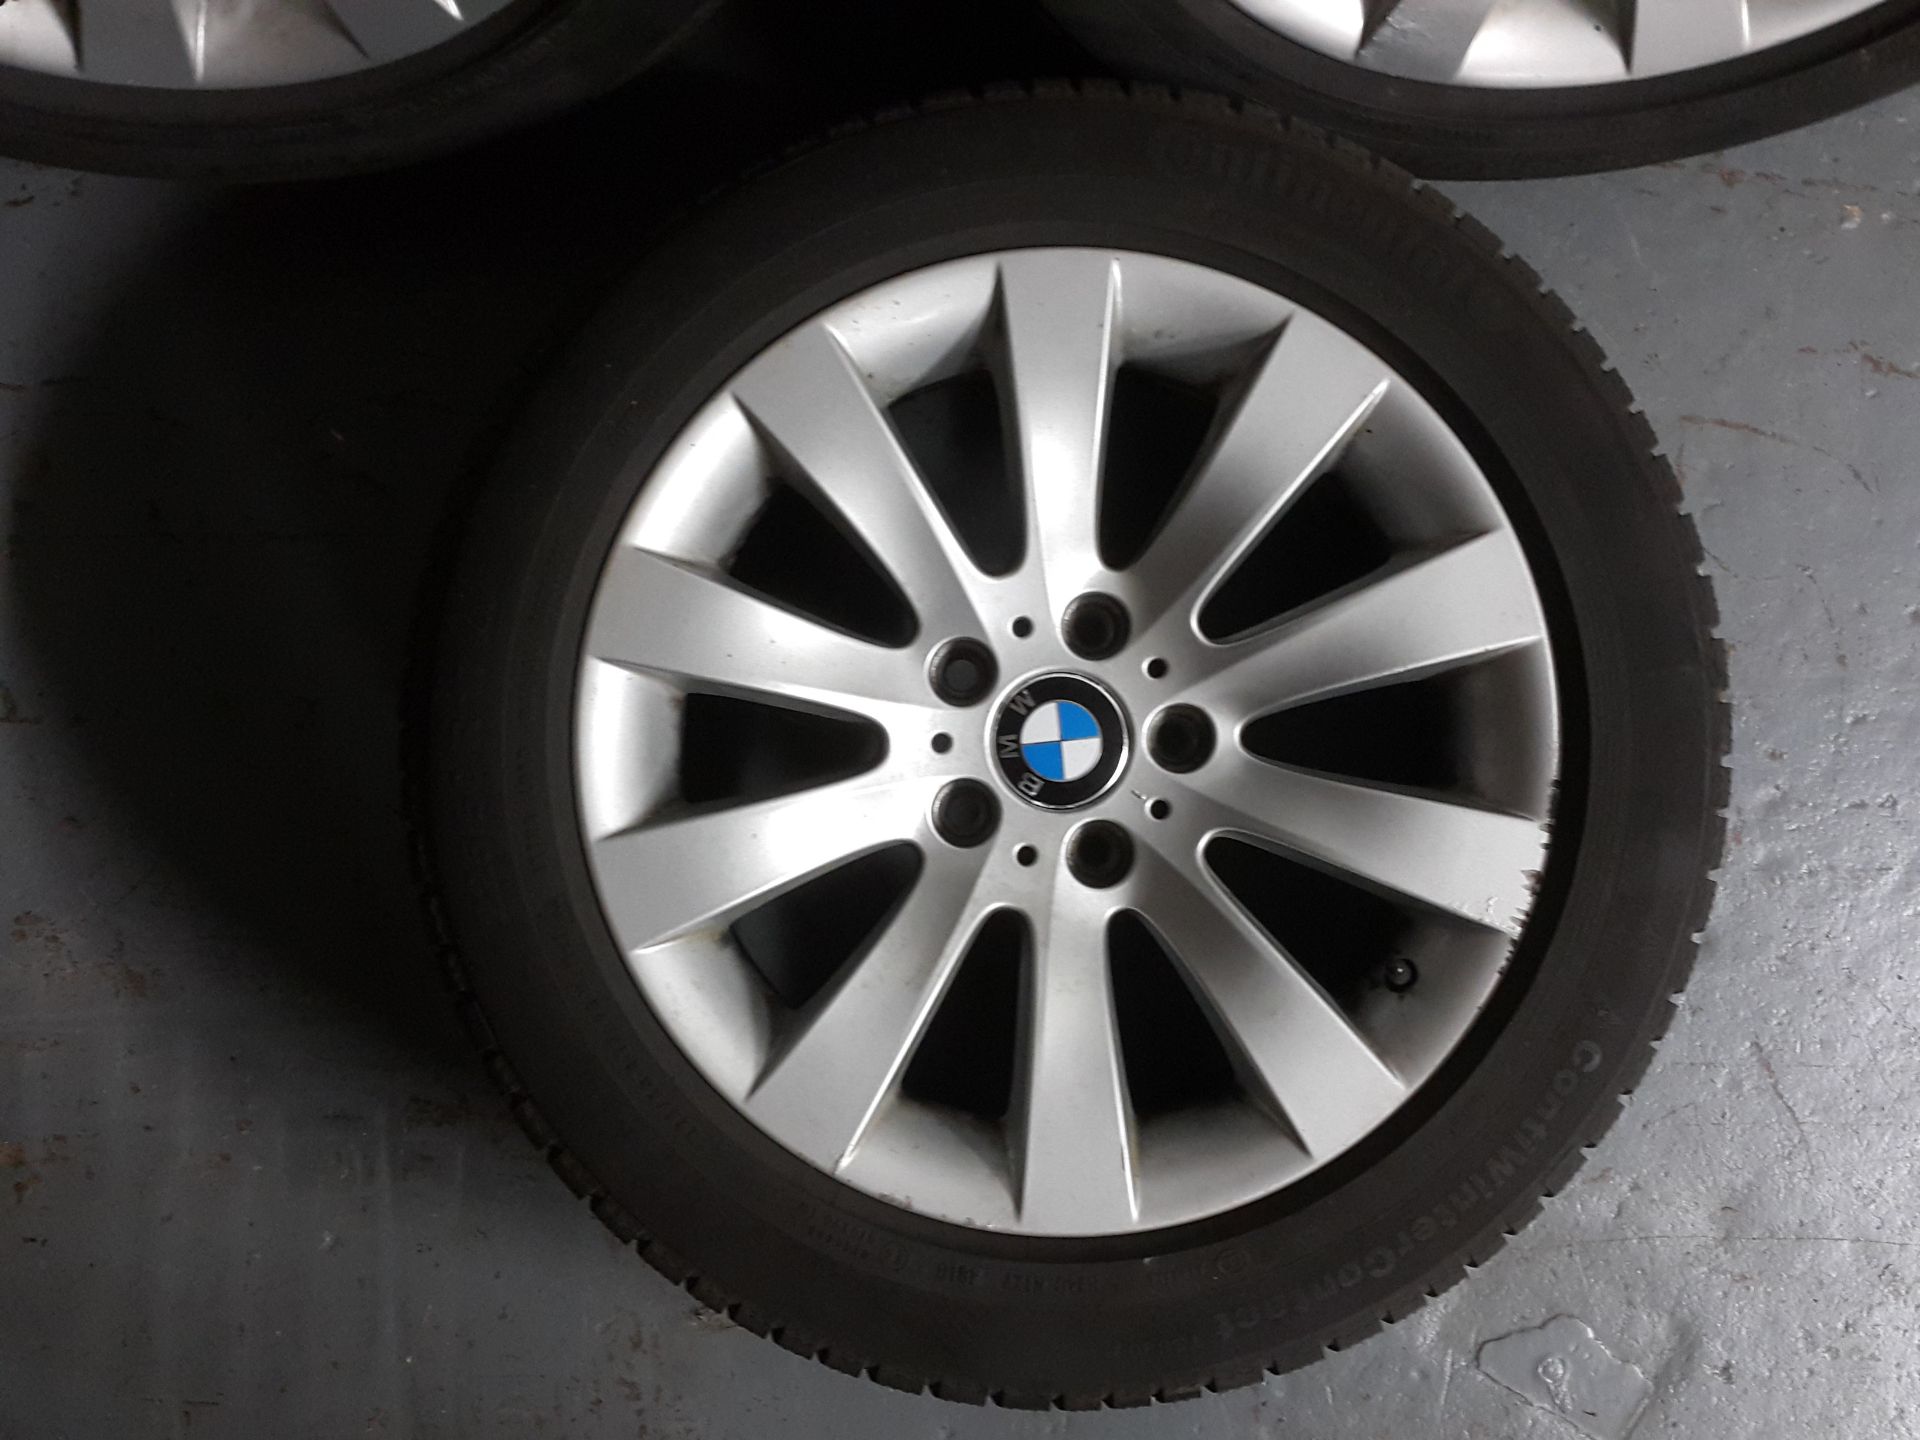 4 X BMW 5 SERIES 17" ALLOY WHEELS WITH CONTINENTAL CONTIWINTER CONTACT WINTER TYRES 225/55/R17 - Image 8 of 9